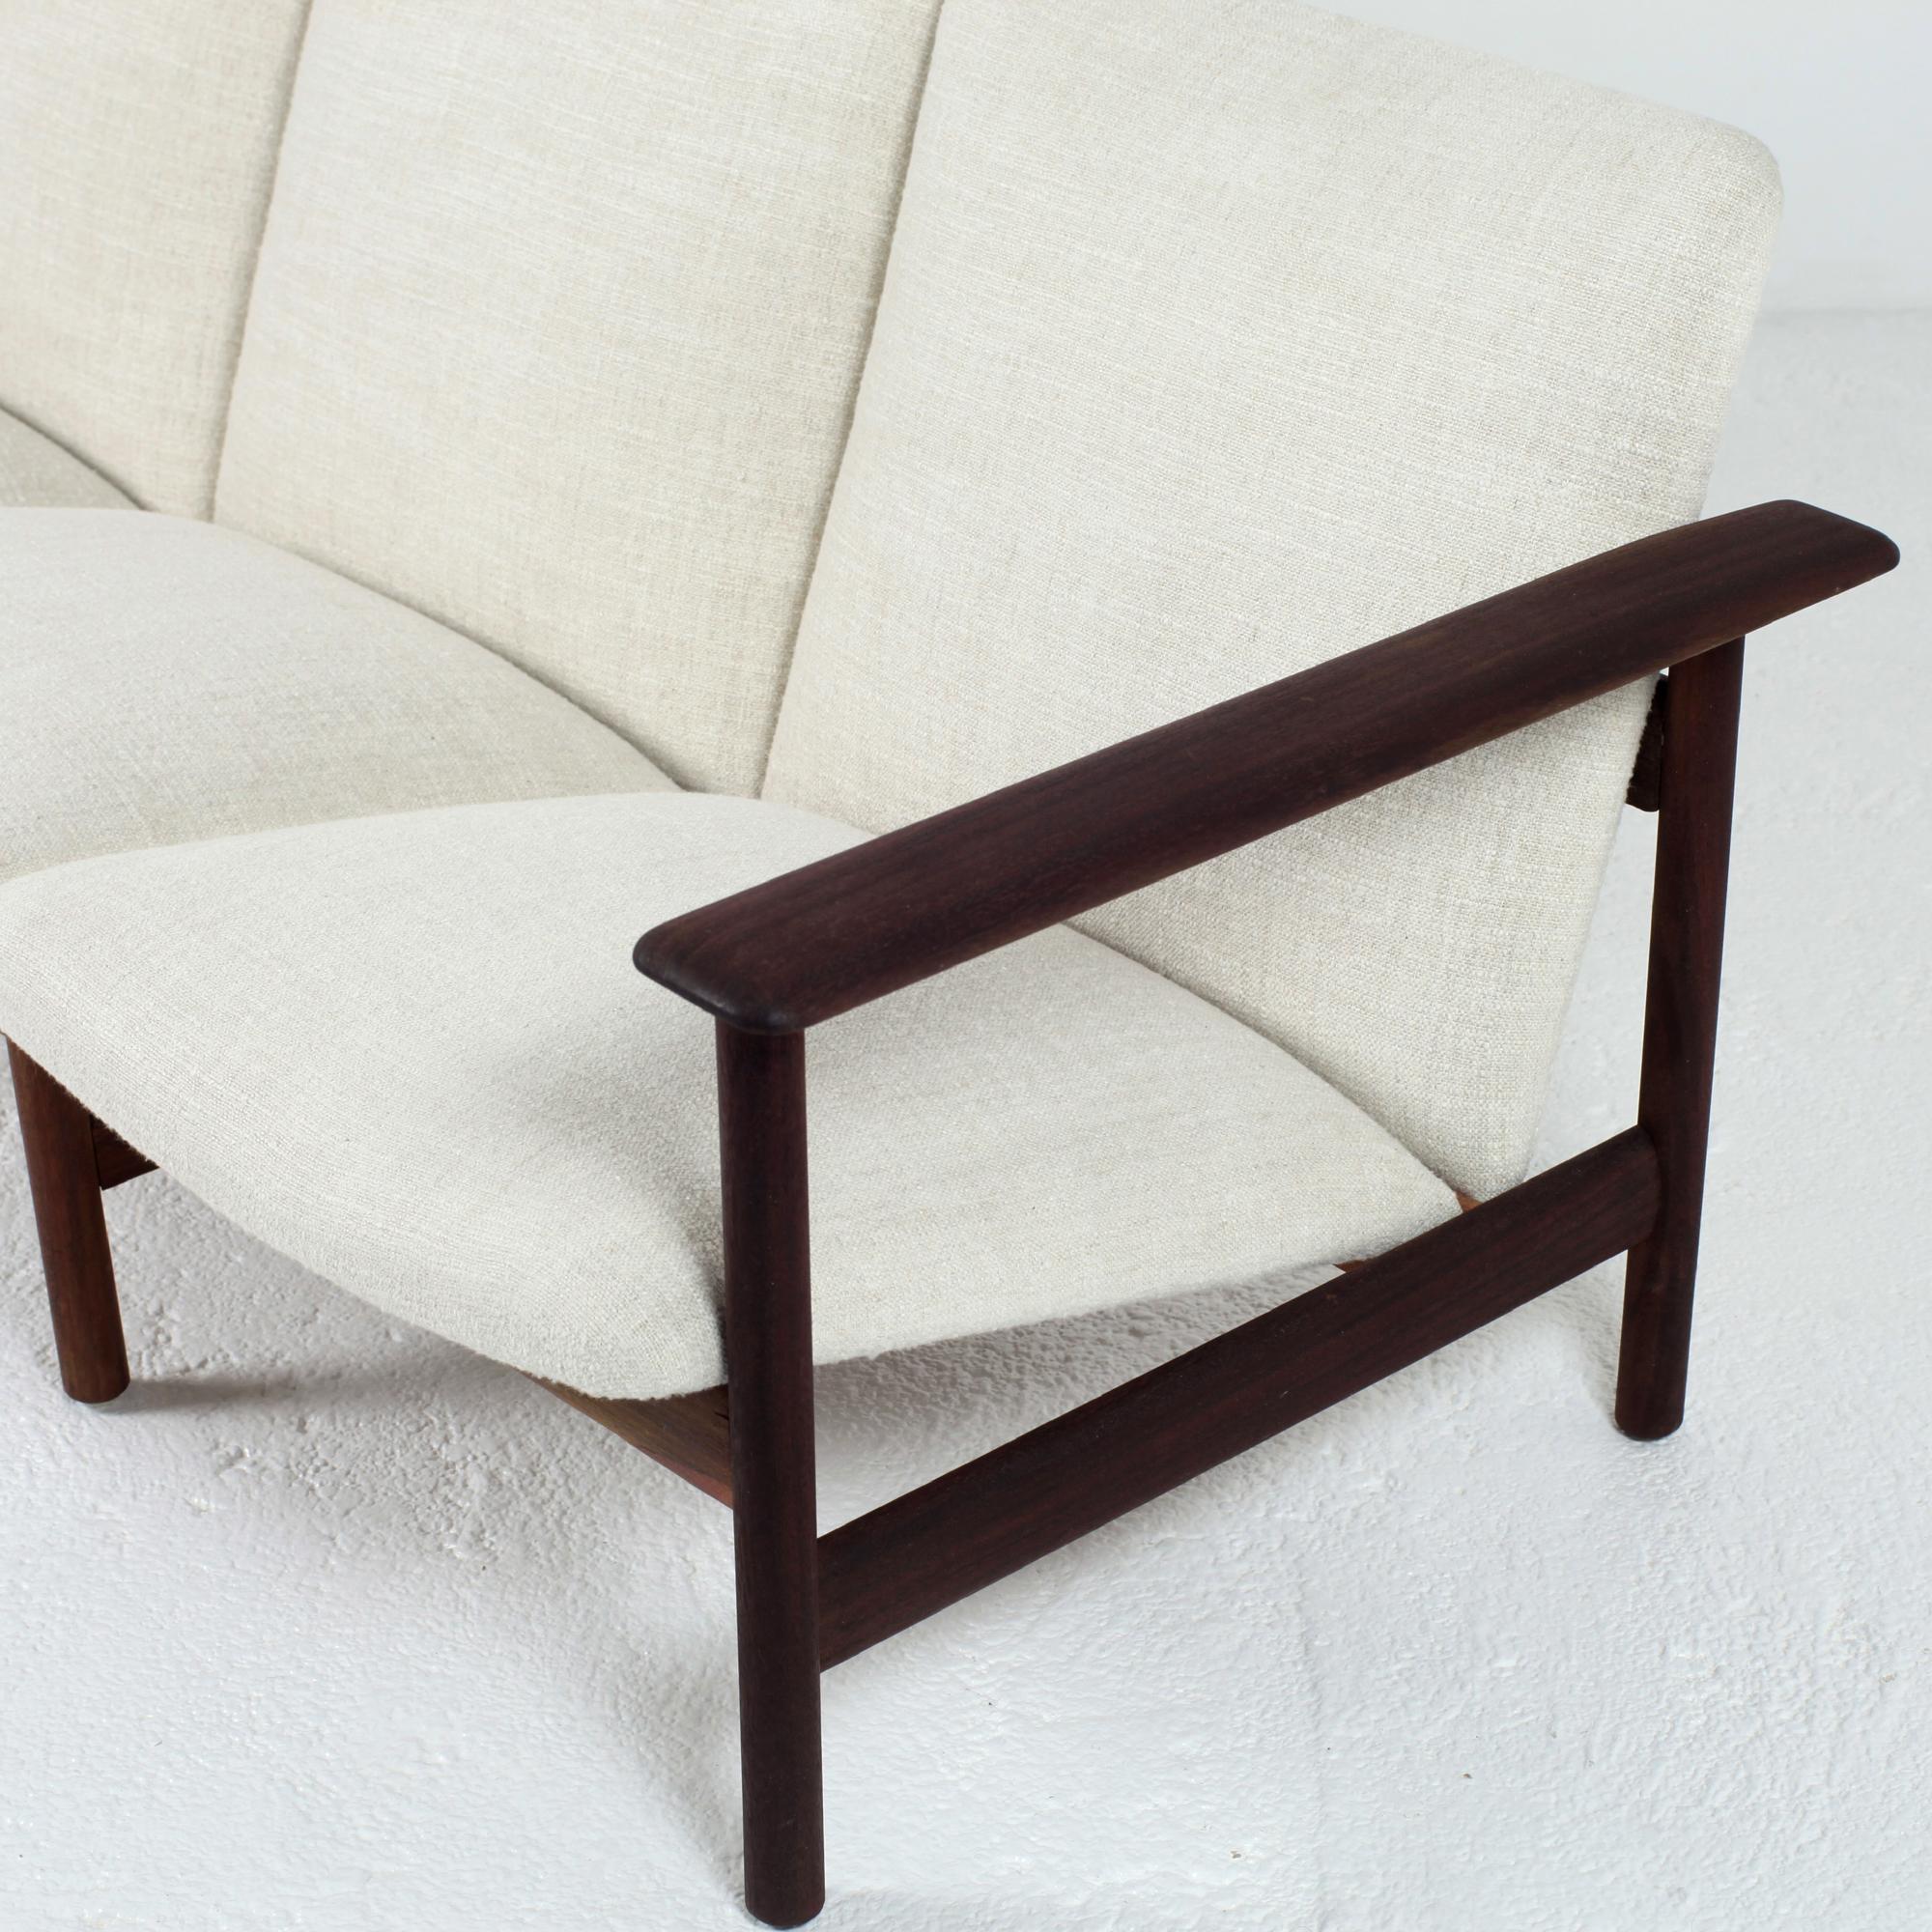 Steiner Sofa Solid Wood Frame and Pierre Frey Fabric, France, 1960s For Sale 2